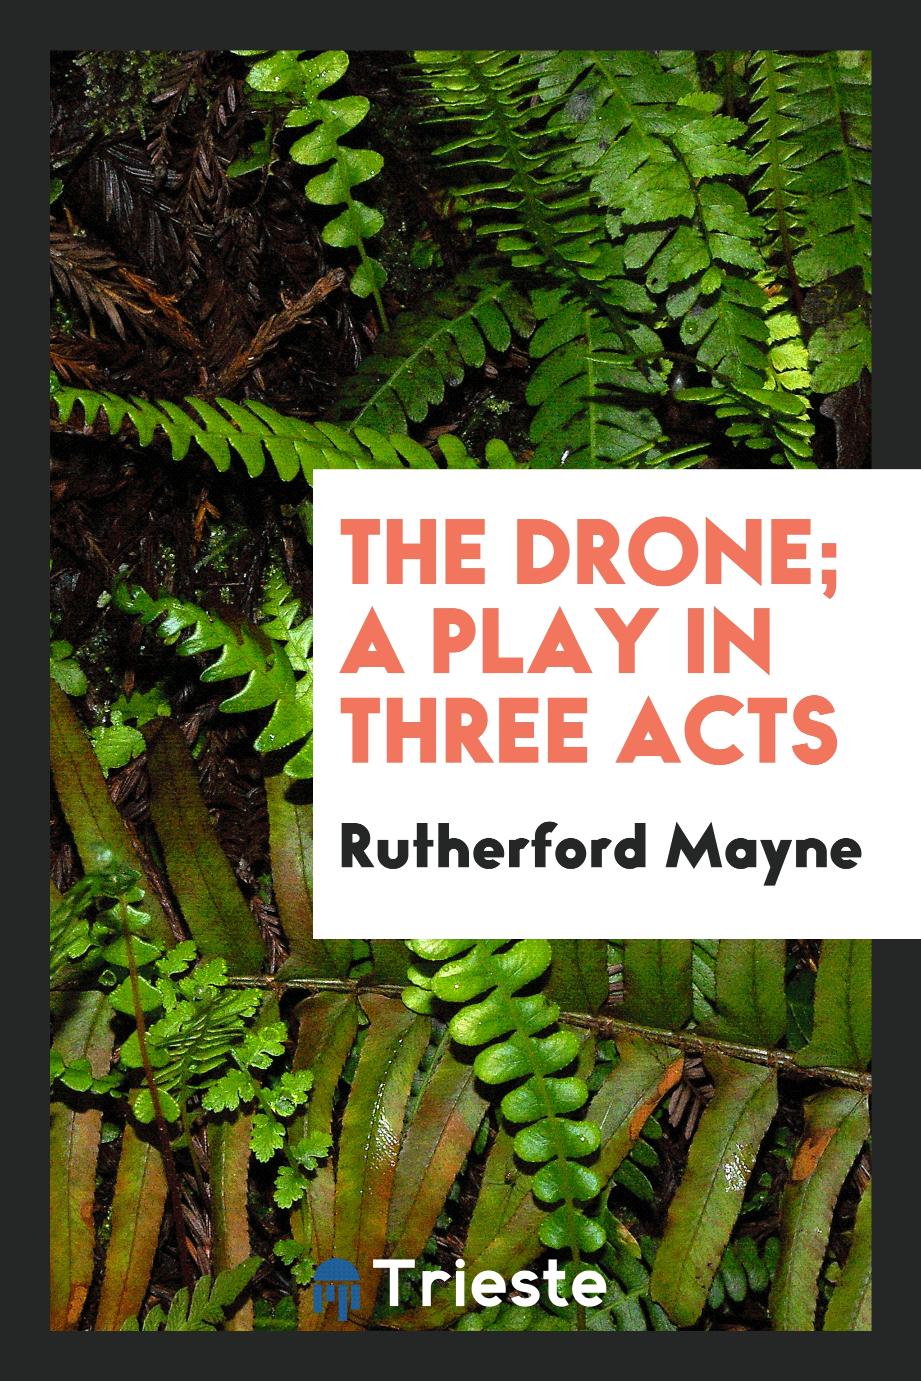 The drone; a play in three acts